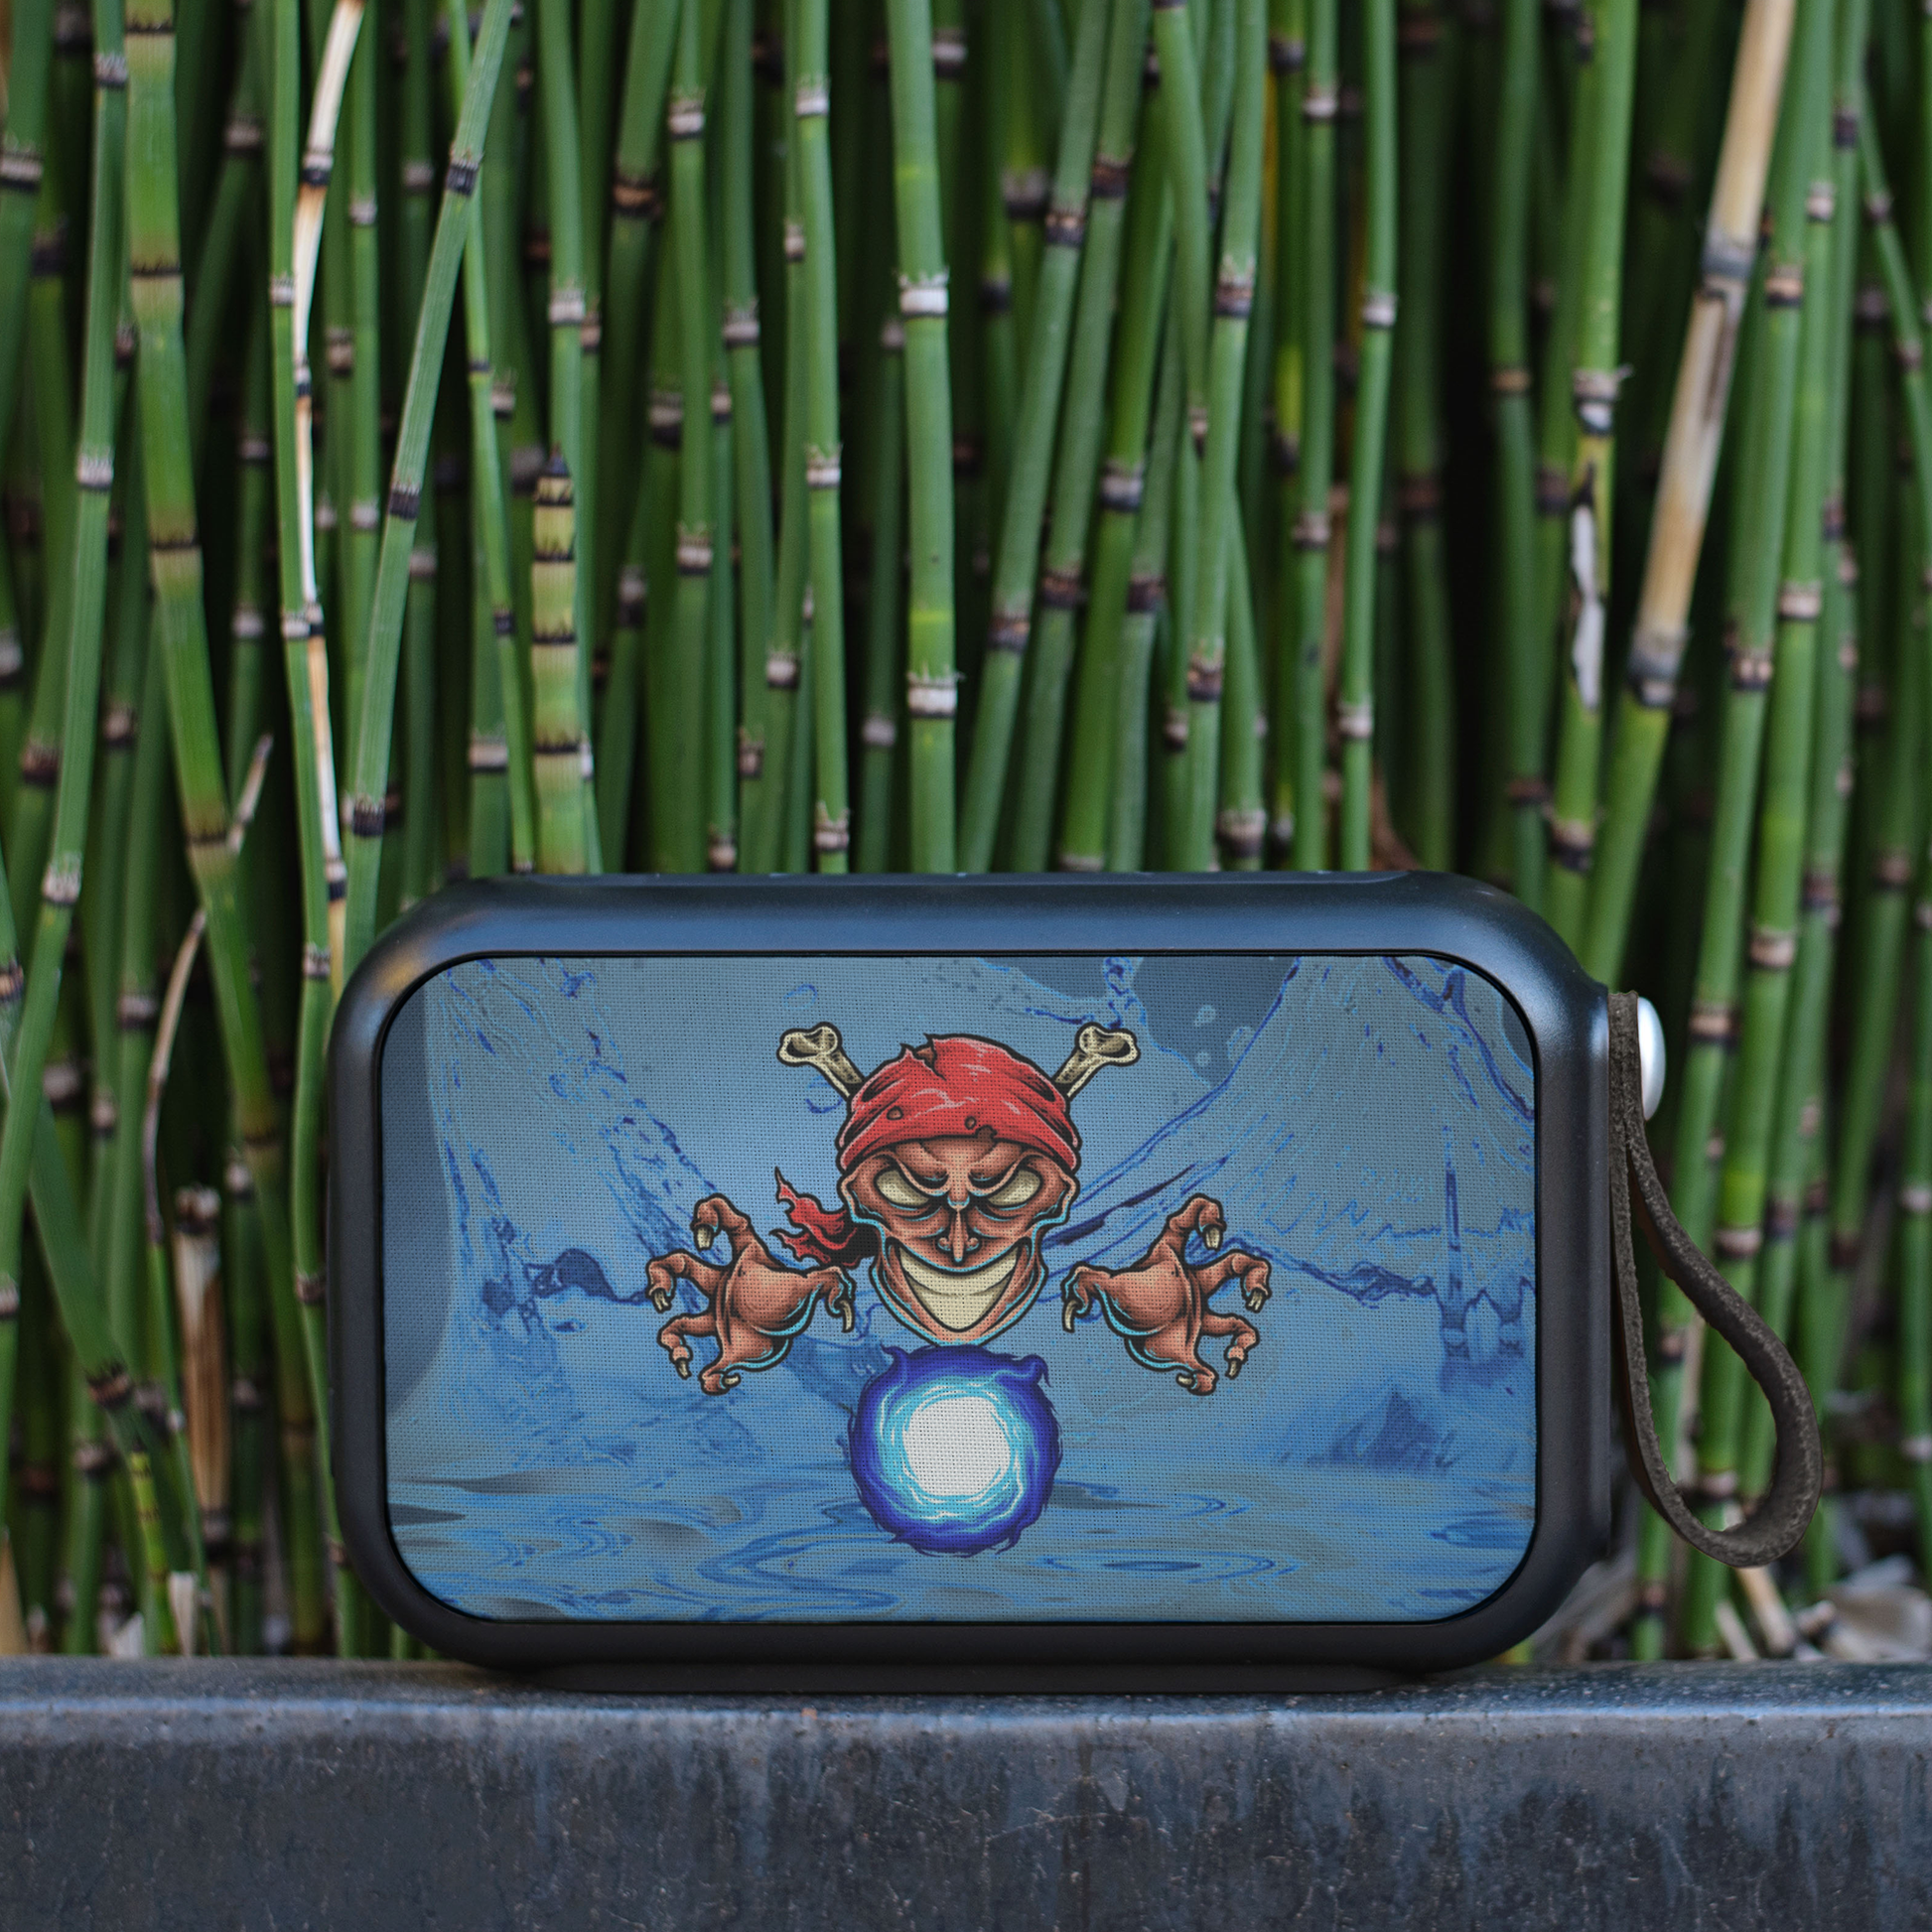 Bluetooth Speaker With Pirate Magician Design - Omtheo Gifts